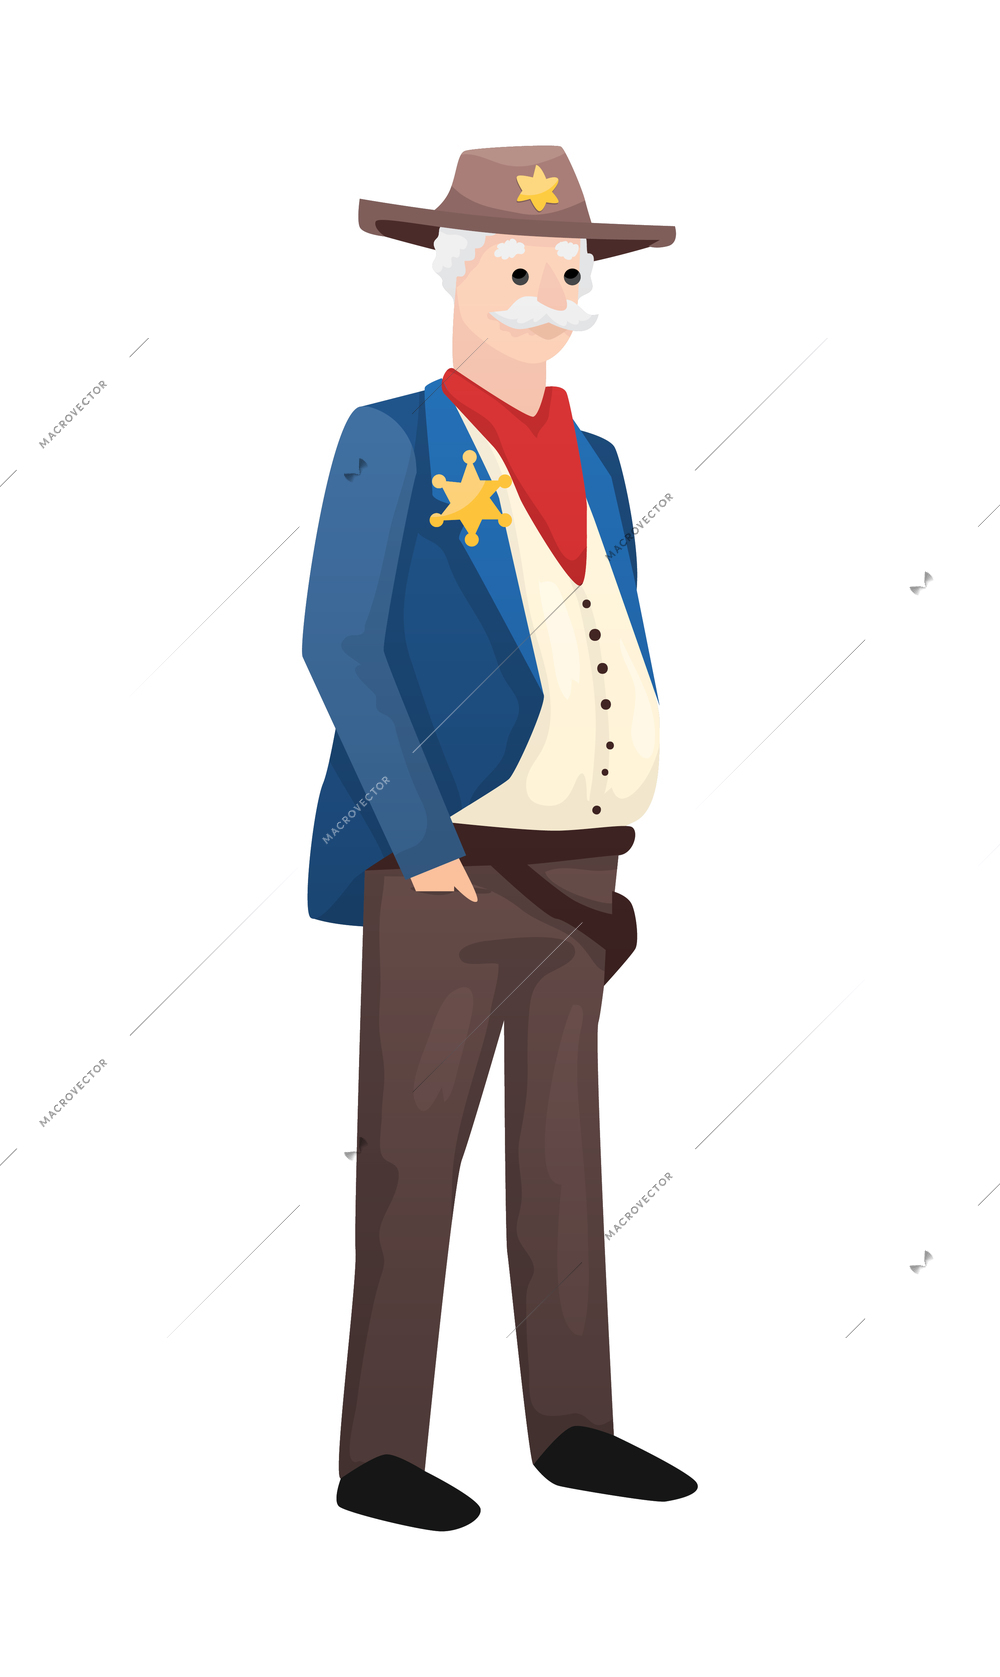 Wild west cowboy composition with isolated human character of sheriff on blank background vector illustration